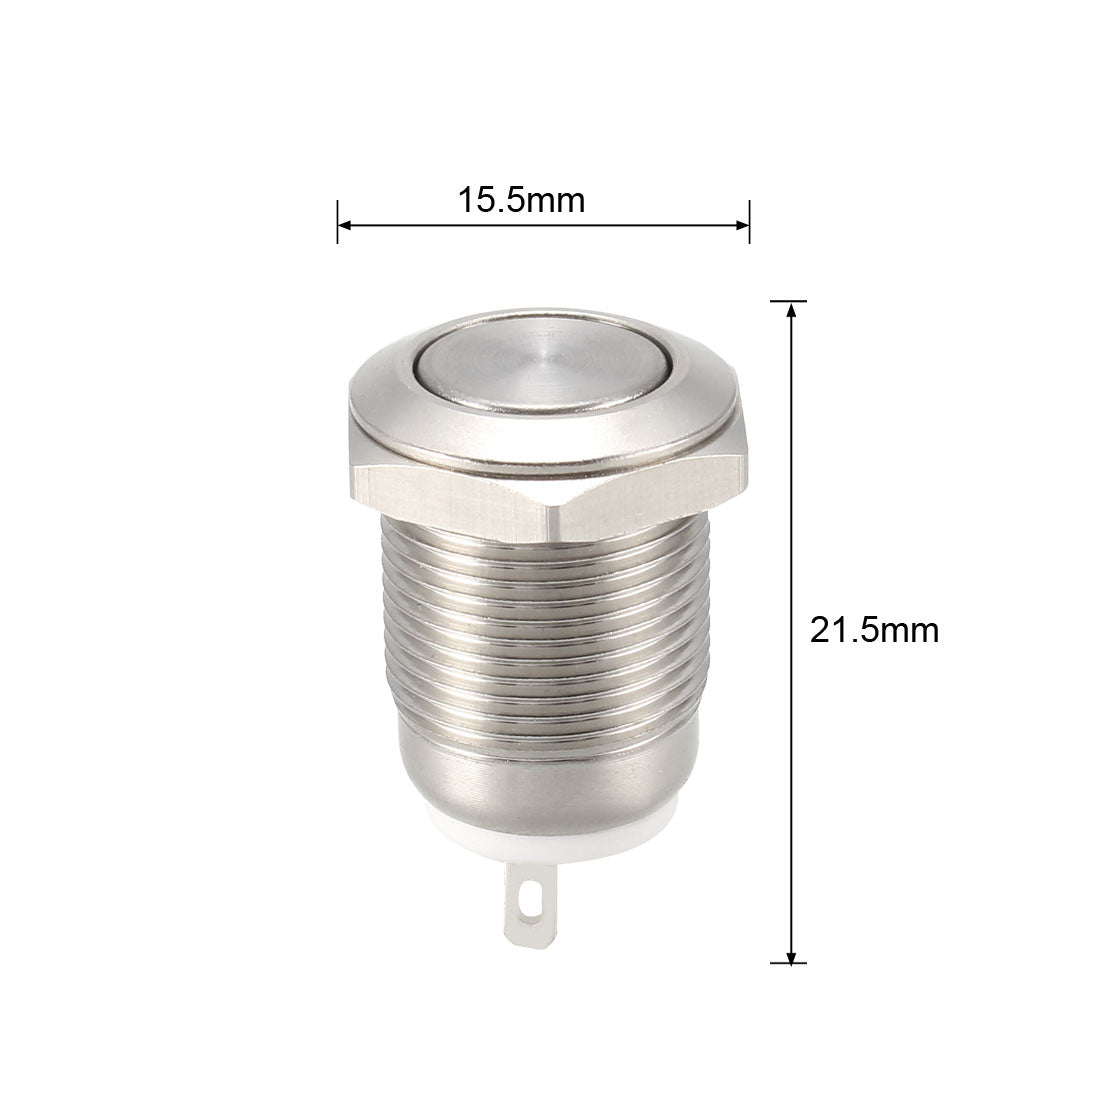 uxcell Uxcell Momentary Metal Push Button Switch Flat Head 12mm Mounting Dia 1NO AC250V 2A